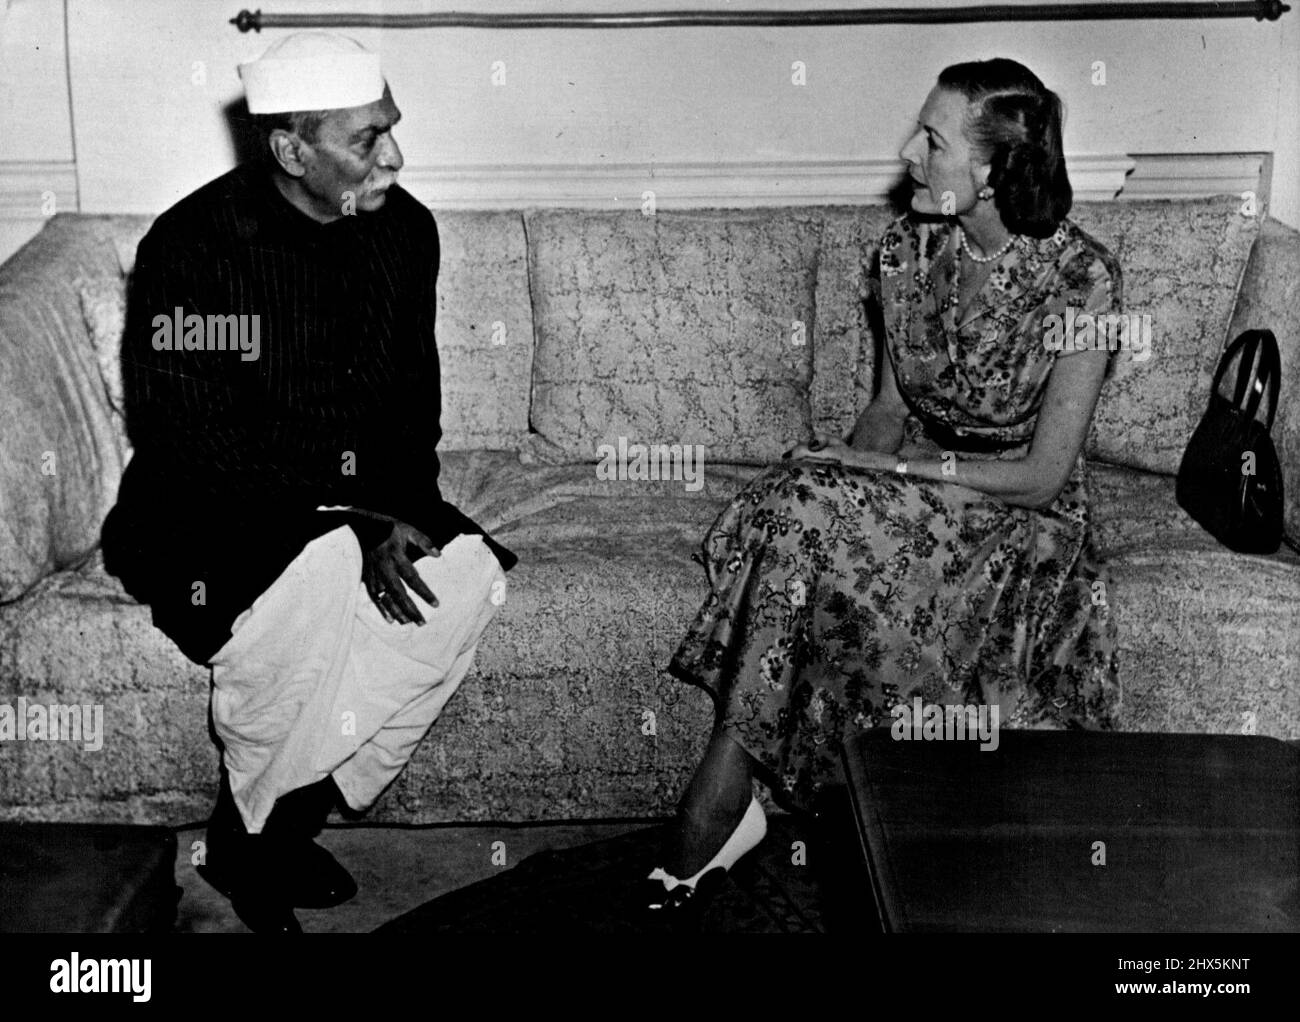 Countess Mountbatten tours The Far East -- The Countess Mountbatten chatting with the president of India at government house, Delhi. Countess Mountbatten, wife of Earl Mountbatten, the last man to be viceroy of India, is touring the far east. She is visiting welfare centres on behalf of the red cross and the order of Saint John. While in India she visited The President, Dr. Rajendra Prasad, at government house. March 03, 1952. (Photo by Paul Popper Photo) Stock Photo